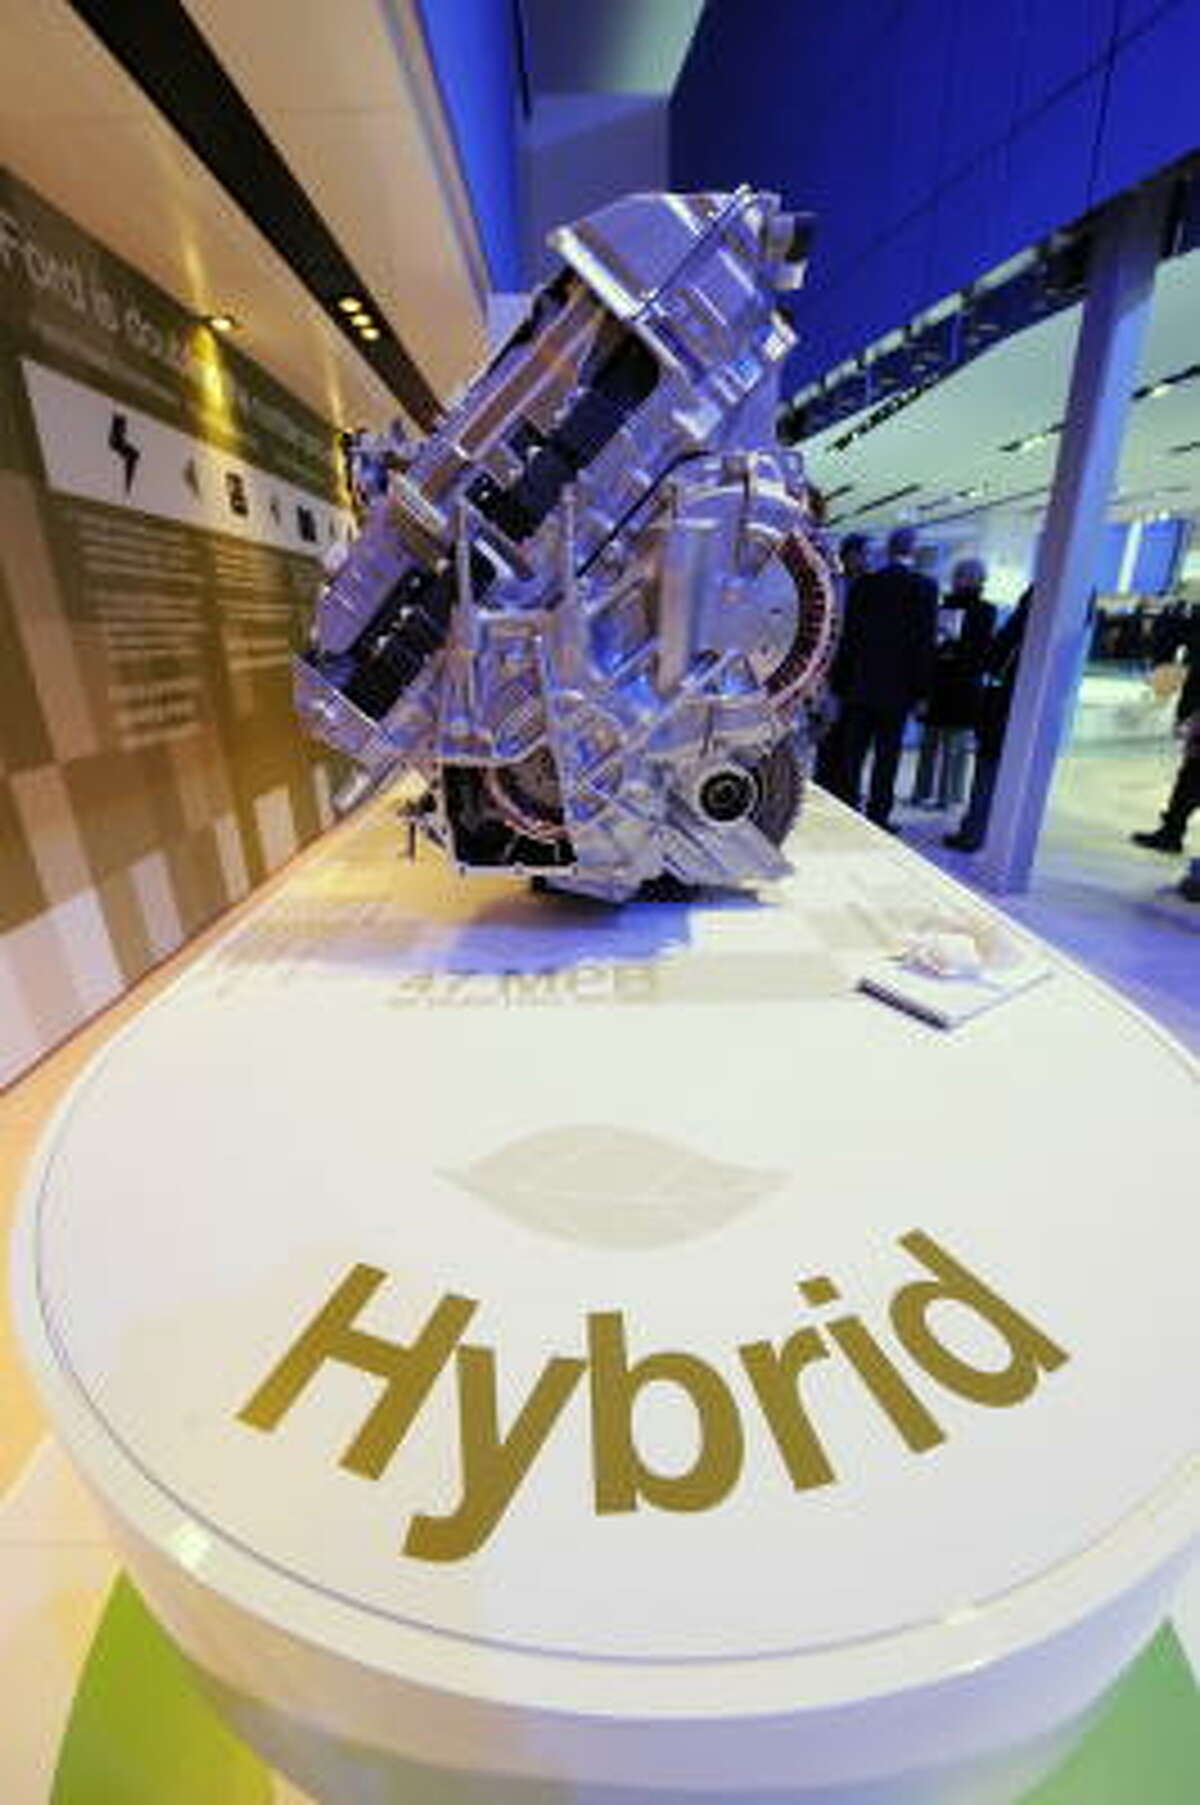 Reducing U.S. oil dependence will require greater fuel efficiency,﻿ such as this hybrid engine.﻿﻿